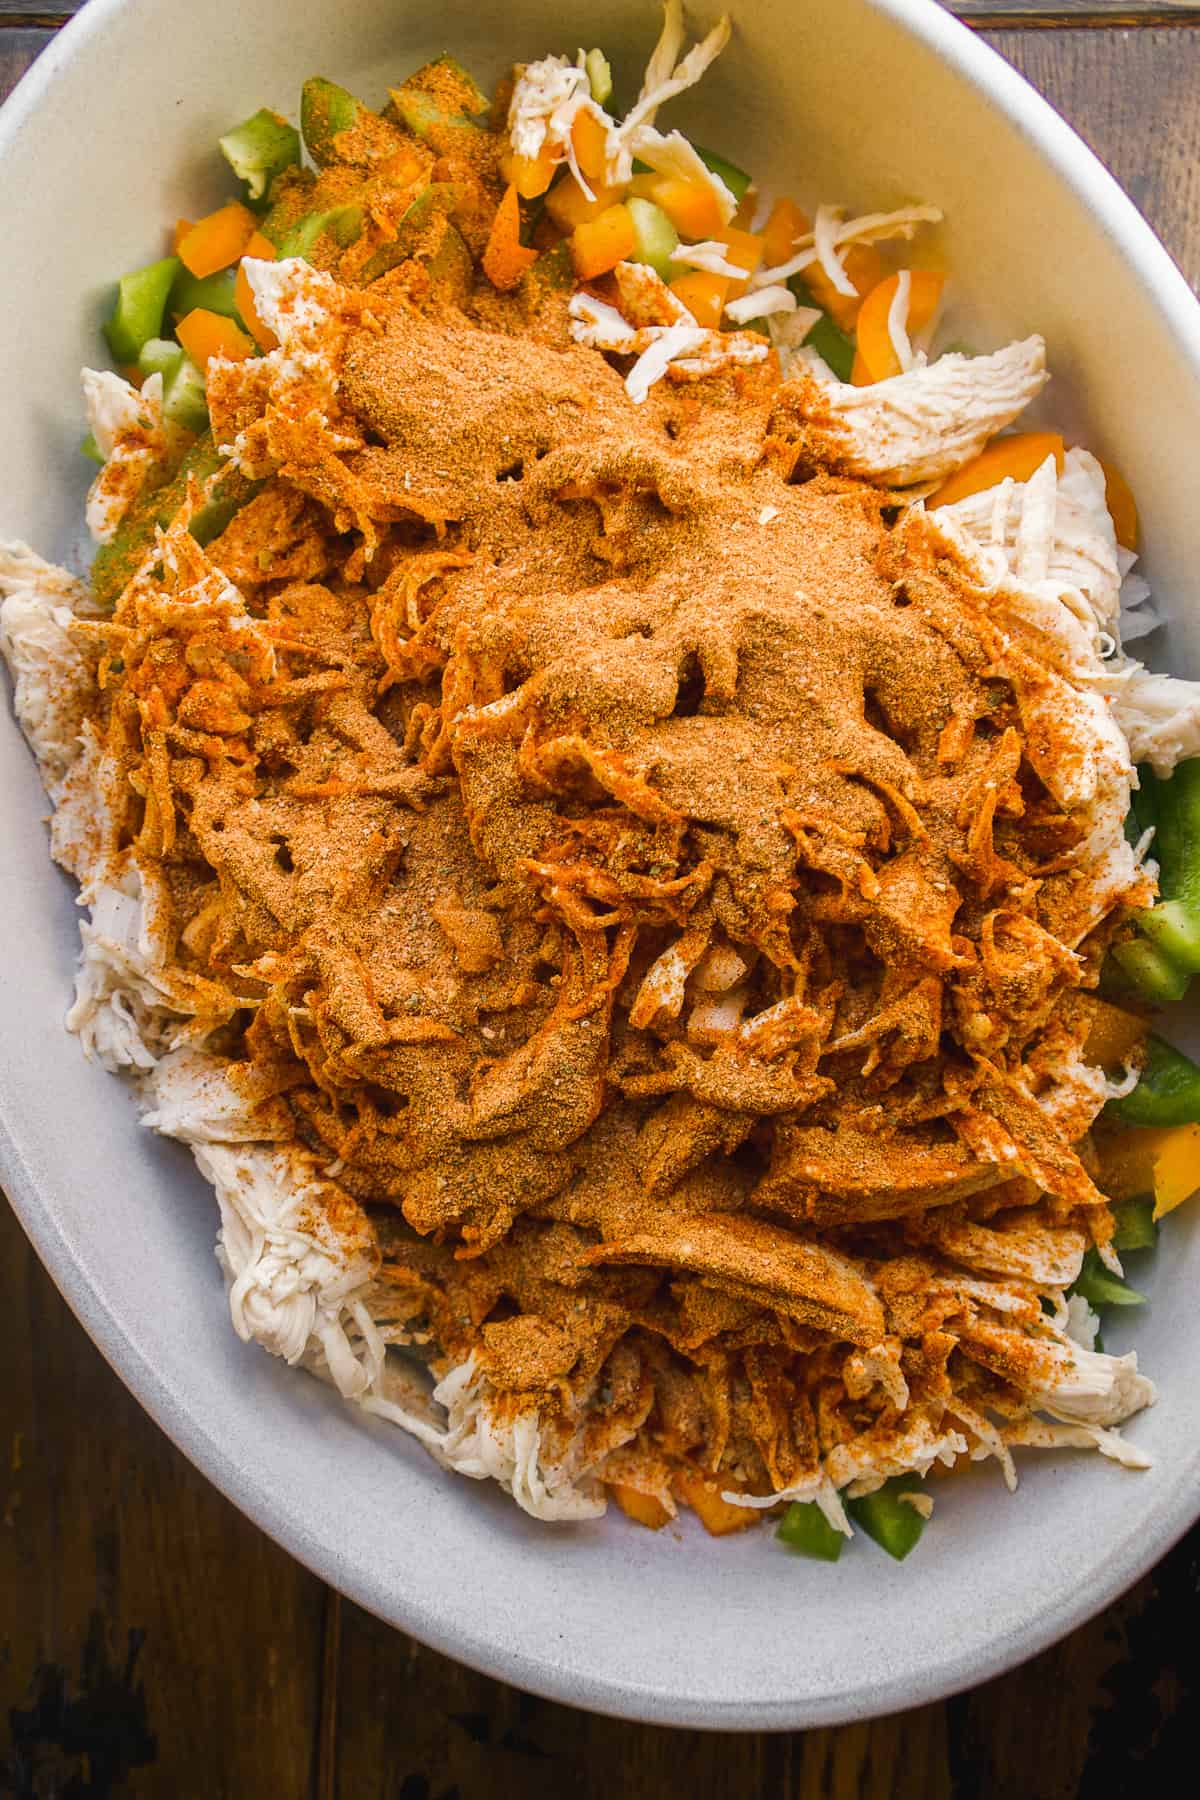 Pulled chicken and veggies about to mixed with taco seasoning in a large dish.